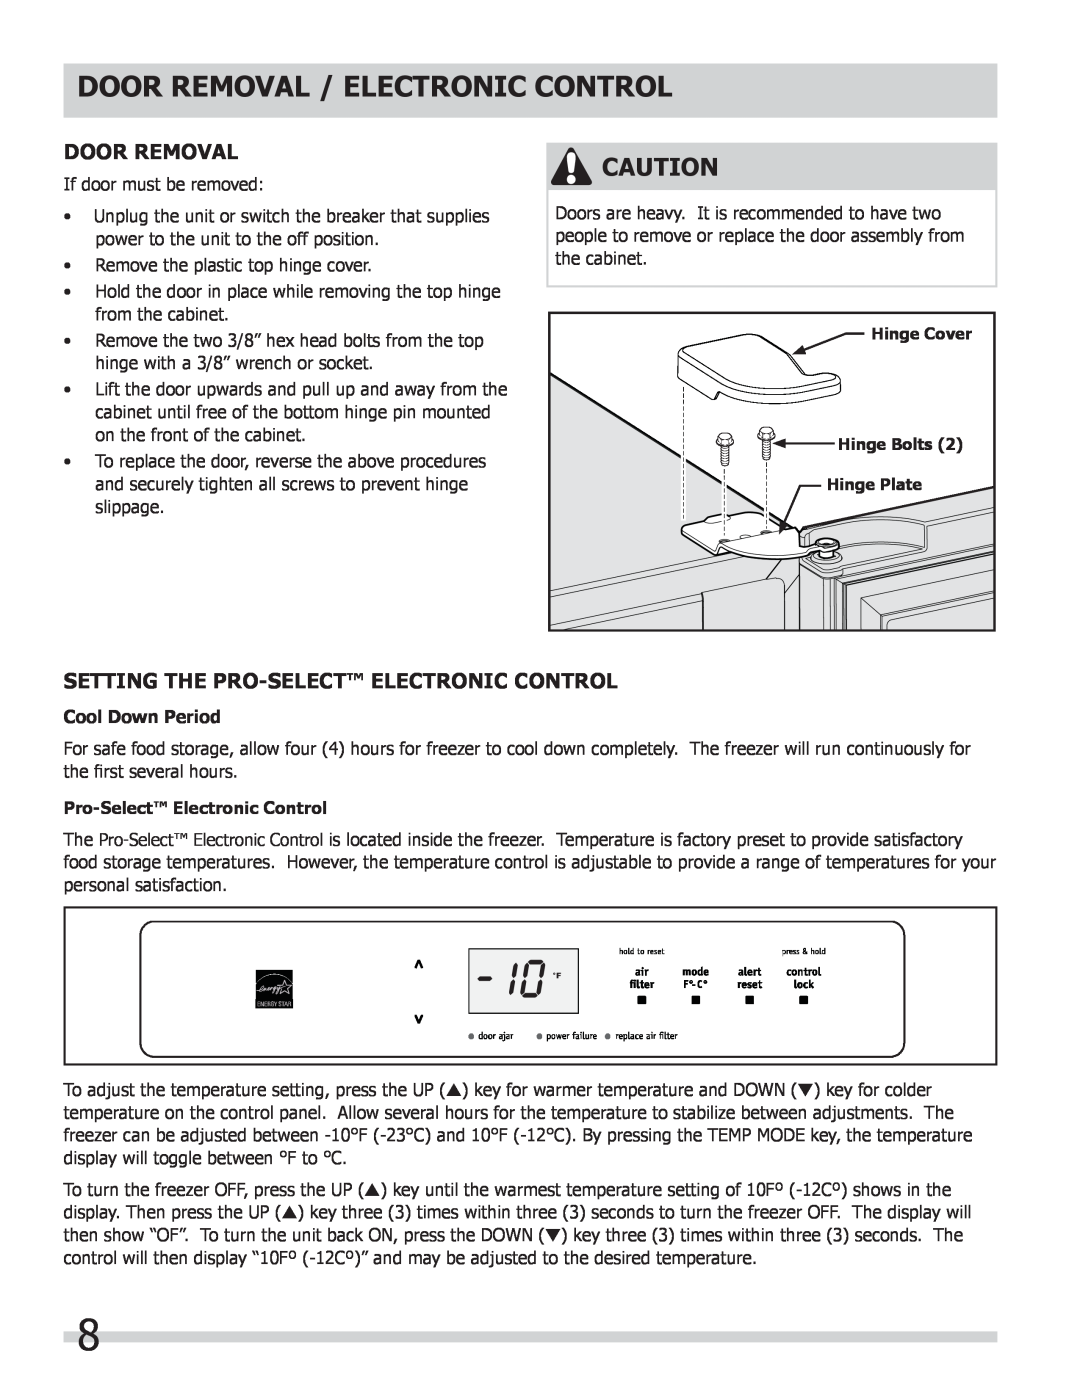 Frigidaire FPUH19D7LF, 297298800 Door Removal / Electronic Control, Setting The Pro-Select Electronic Control 